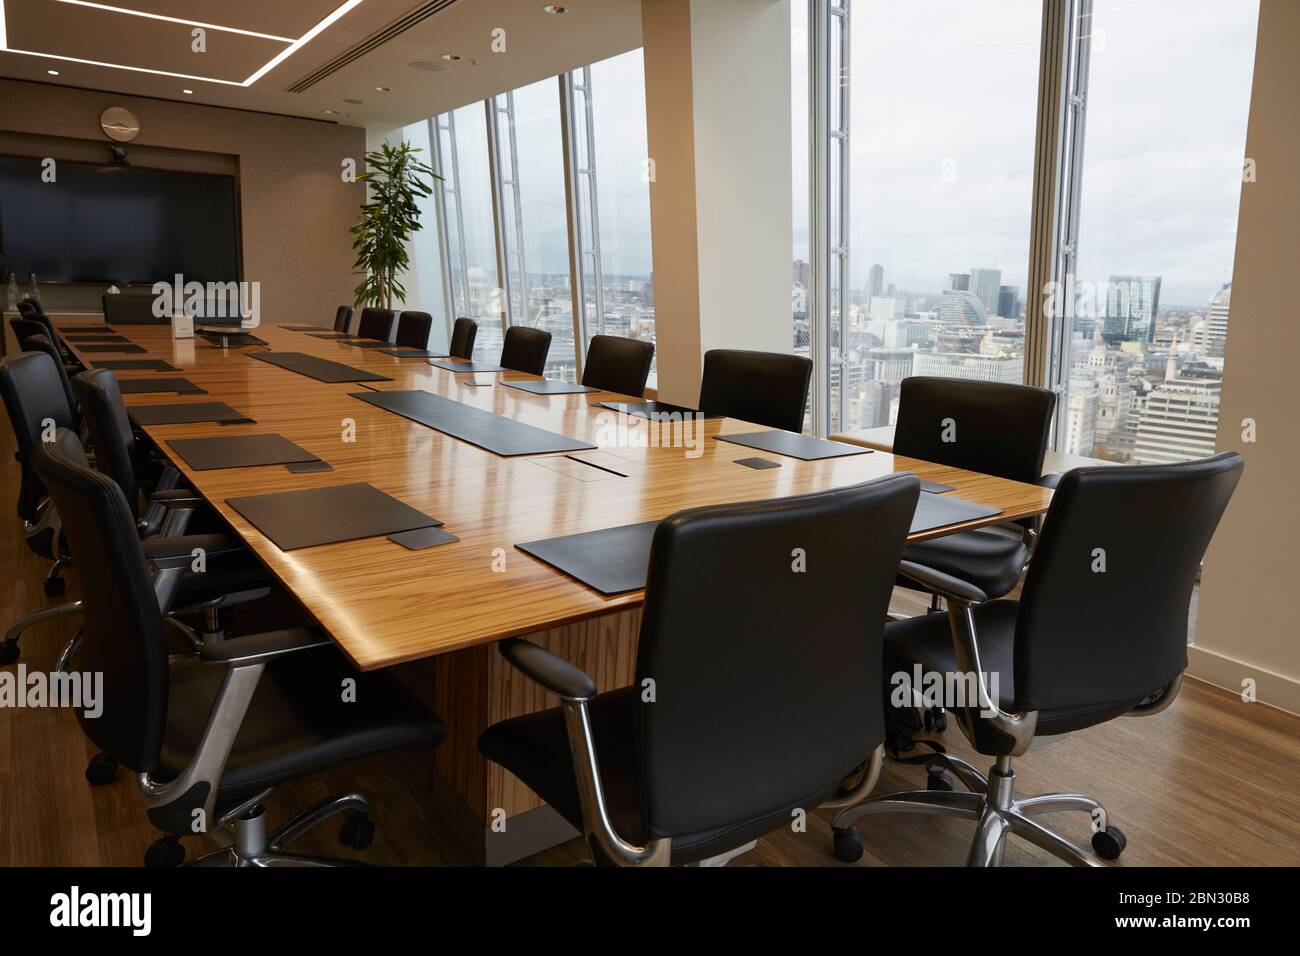 Modern conference room table overlooking city Stock Photo